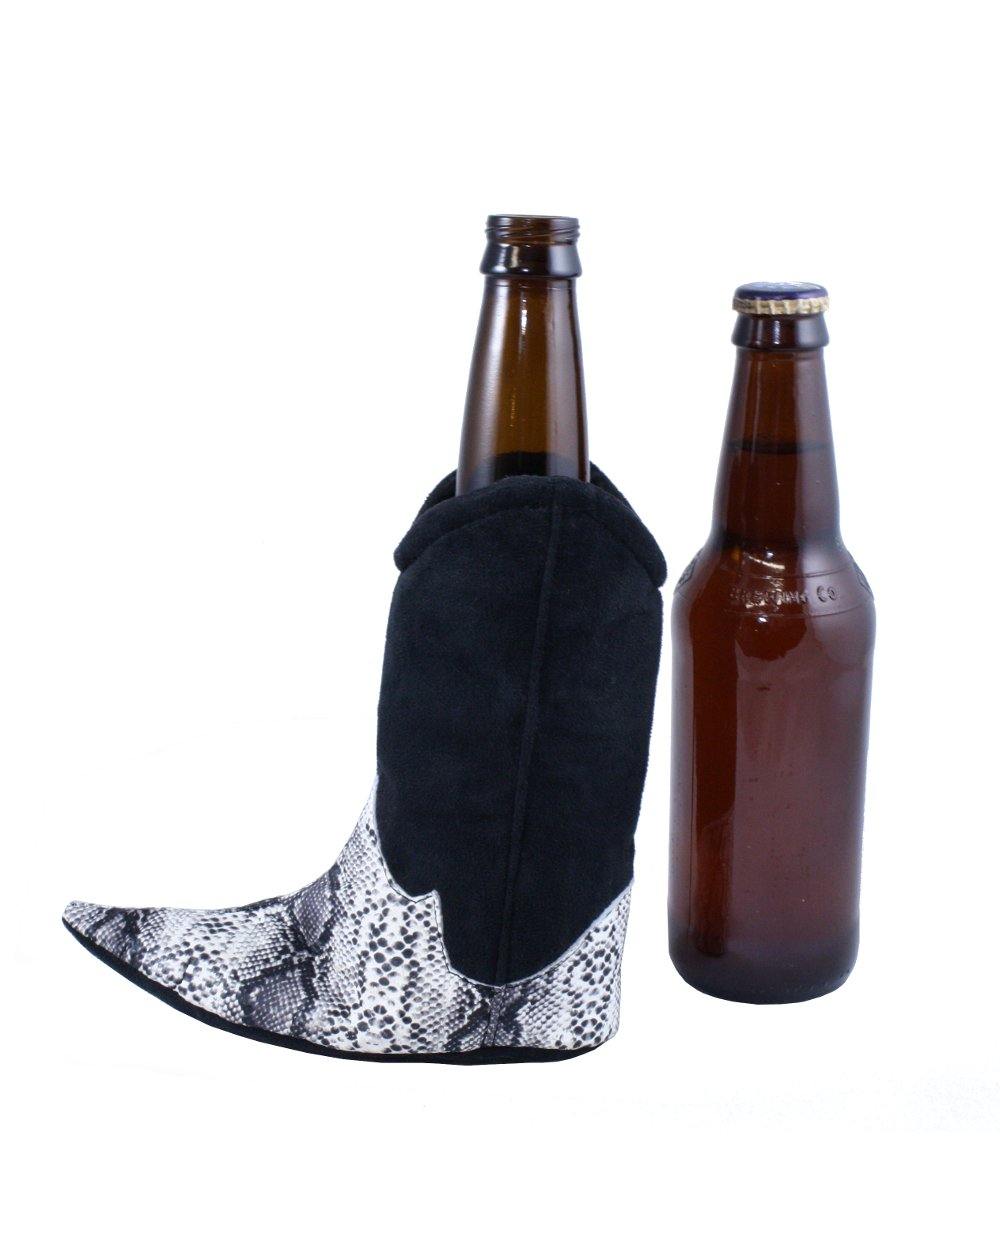 The Booze Boot by Tipsy Totes - Insulated cowboy boot koozie for beer and water bottles